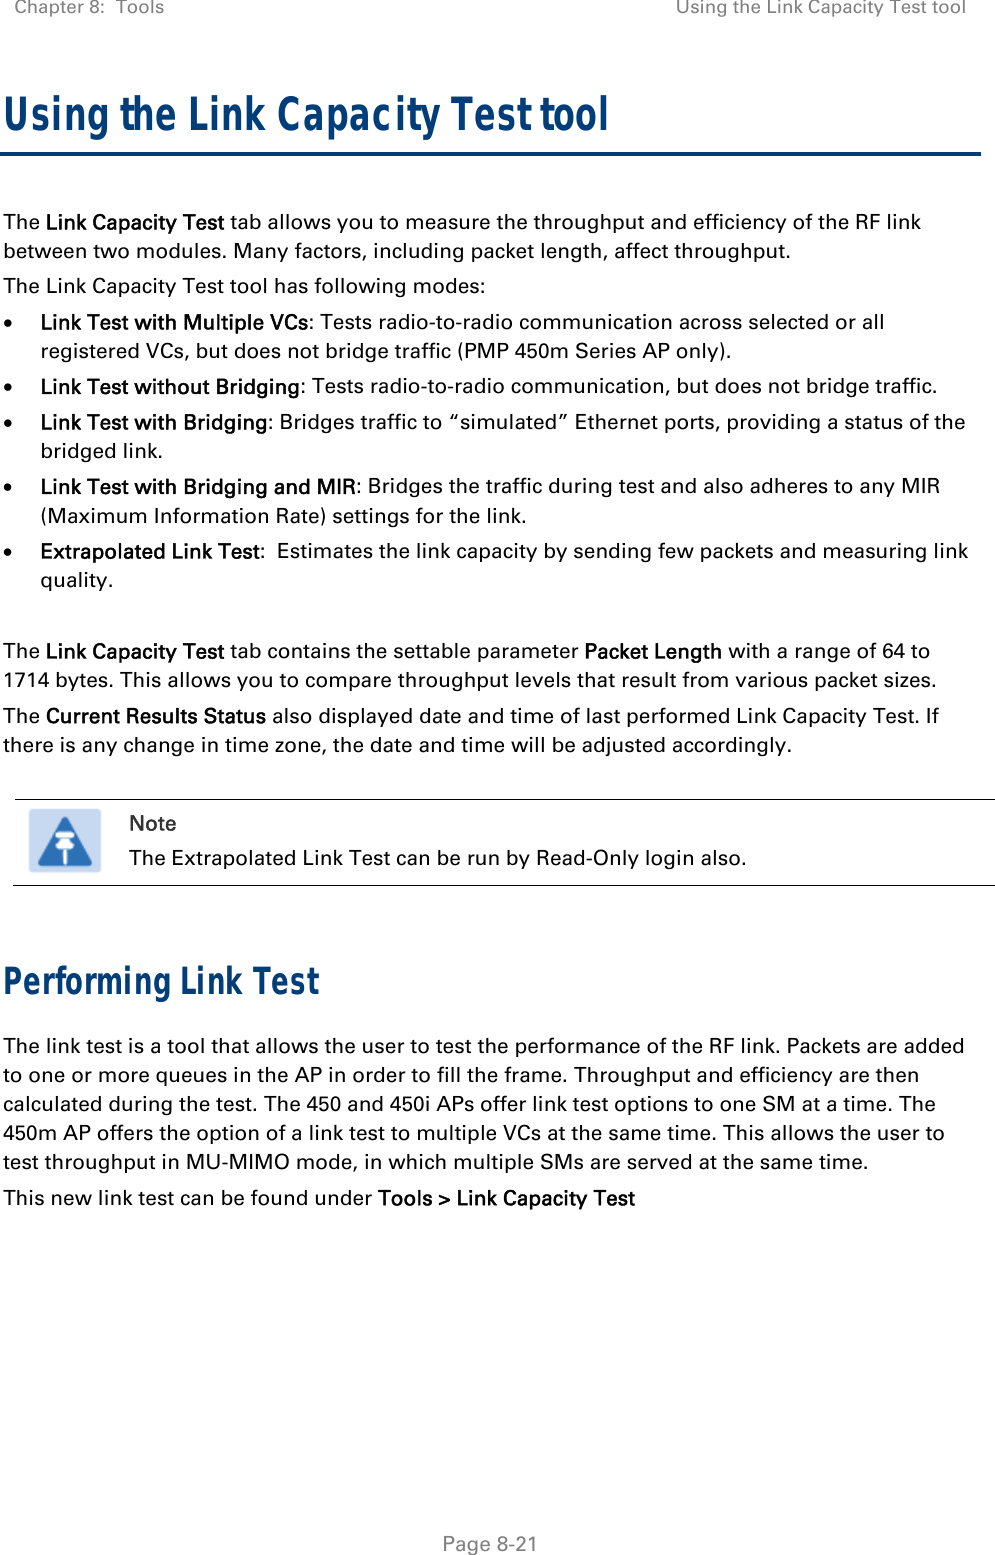 Chapter 8:  Tools  Using the Link Capacity Test tool   Page 8-21 Using the Link Capacity Test tool The Link Capacity Test tab allows you to measure the throughput and efficiency of the RF link between two modules. Many factors, including packet length, affect throughput.  The Link Capacity Test tool has following modes:  Link Test with Multiple VCs: Tests radio-to-radio communication across selected or all registered VCs, but does not bridge traffic (PMP 450m Series AP only).  Link Test without Bridging: Tests radio-to-radio communication, but does not bridge traffic.  Link Test with Bridging: Bridges traffic to “simulated” Ethernet ports, providing a status of the bridged link.  Link Test with Bridging and MIR: Bridges the traffic during test and also adheres to any MIR (Maximum Information Rate) settings for the link.  Extrapolated Link Test:  Estimates the link capacity by sending few packets and measuring link quality.  The Link Capacity Test tab contains the settable parameter Packet Length with a range of 64 to 1714 bytes. This allows you to compare throughput levels that result from various packet sizes. The Current Results Status also displayed date and time of last performed Link Capacity Test. If there is any change in time zone, the date and time will be adjusted accordingly.   Note The Extrapolated Link Test can be run by Read-Only login also.  Performing Link Test The link test is a tool that allows the user to test the performance of the RF link. Packets are added to one or more queues in the AP in order to fill the frame. Throughput and efficiency are then calculated during the test. The 450 and 450i APs offer link test options to one SM at a time. The 450m AP offers the option of a link test to multiple VCs at the same time. This allows the user to test throughput in MU-MIMO mode, in which multiple SMs are served at the same time. This new link test can be found under Tools &gt; Link Capacity Test 